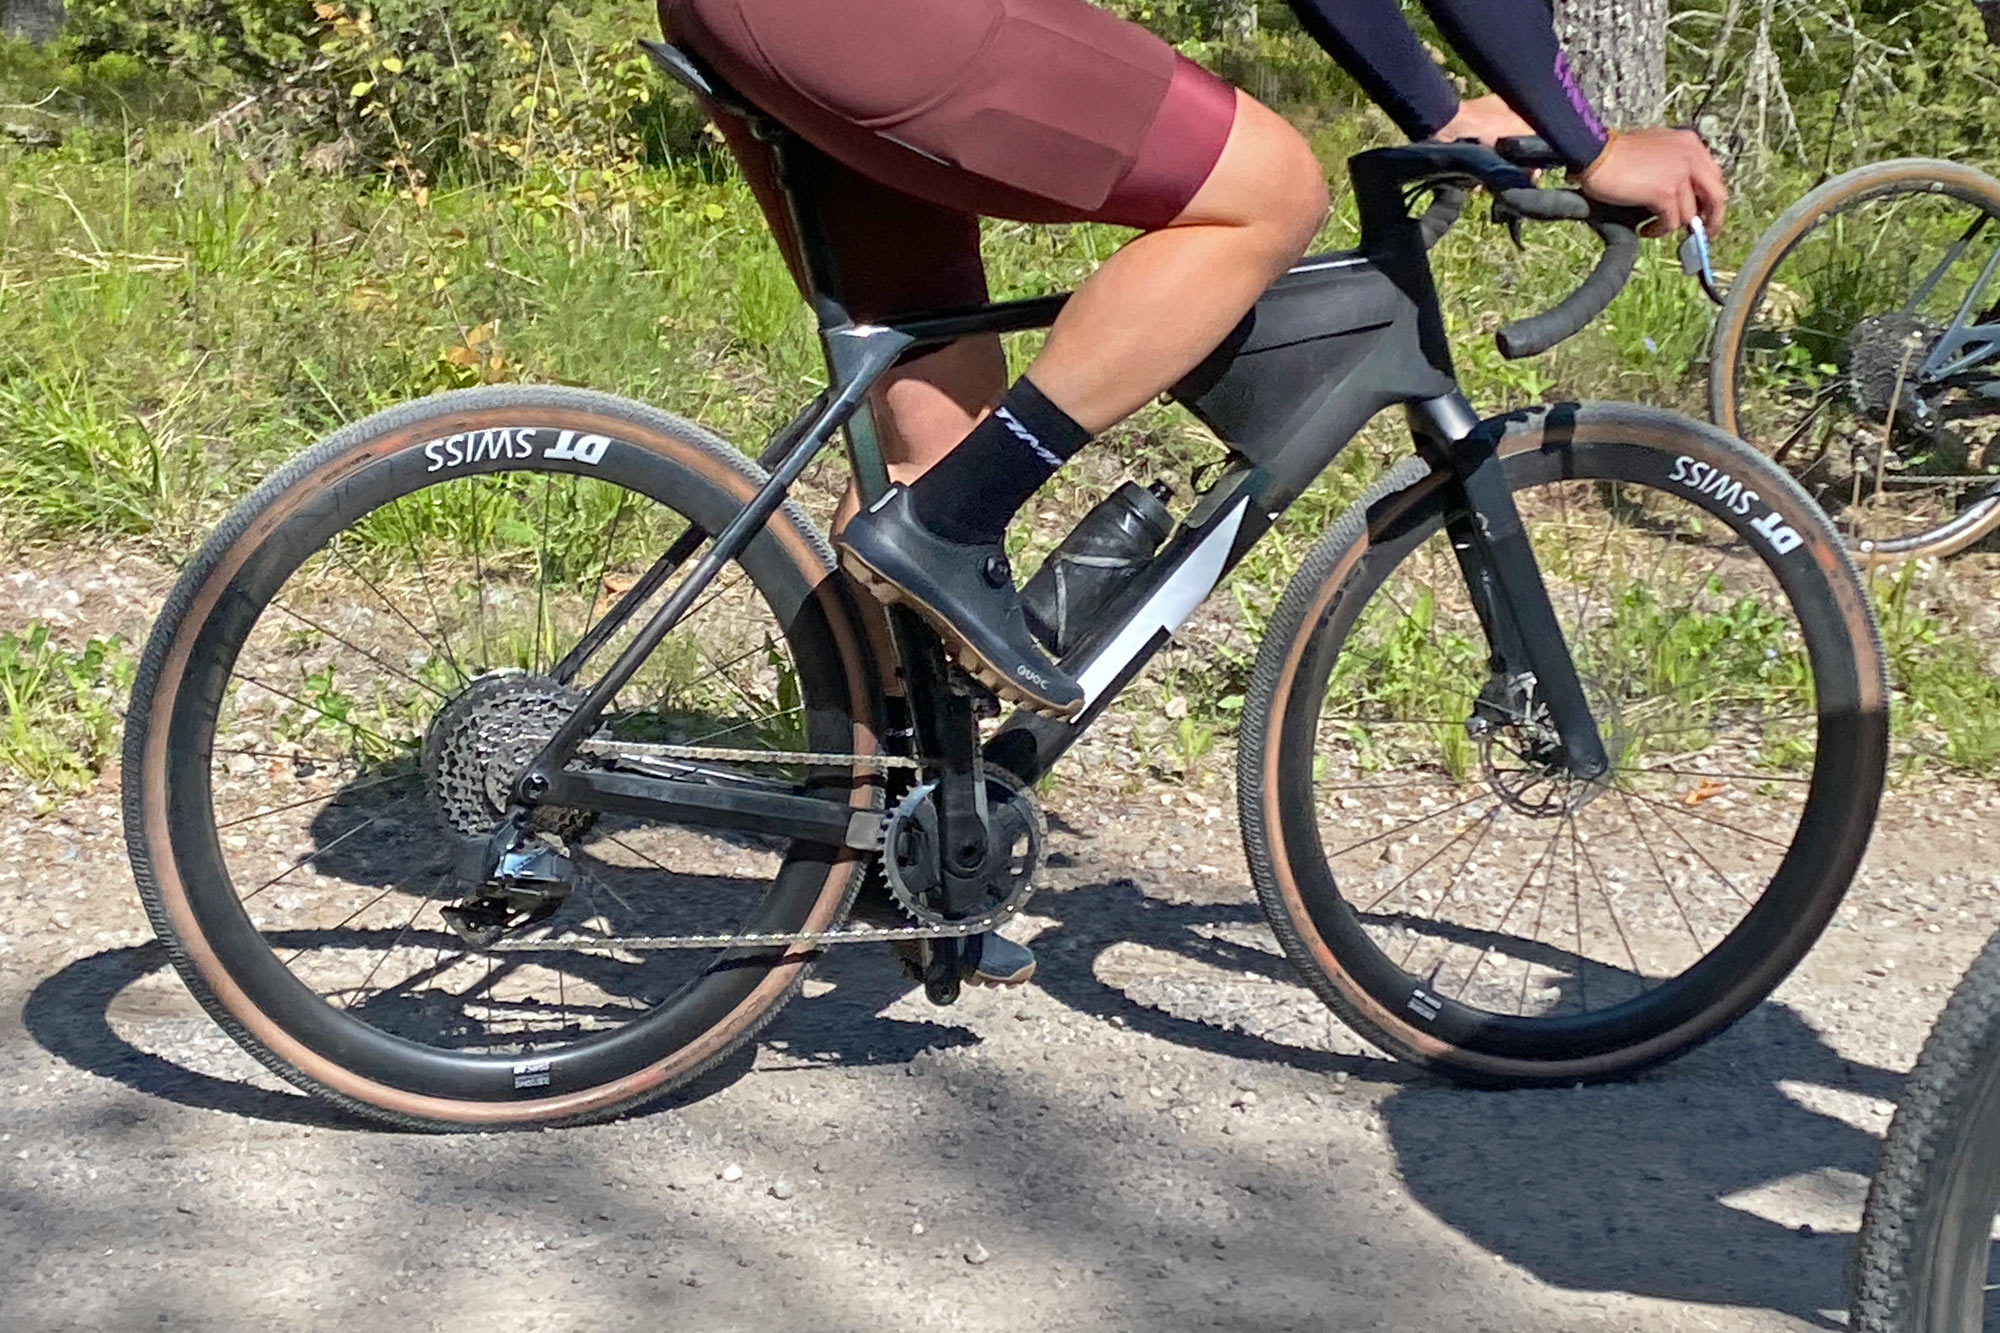 Is This a Prototype Canyon Grail CFR? New Carbon Canyon Gravel Race Bike Spy Shots